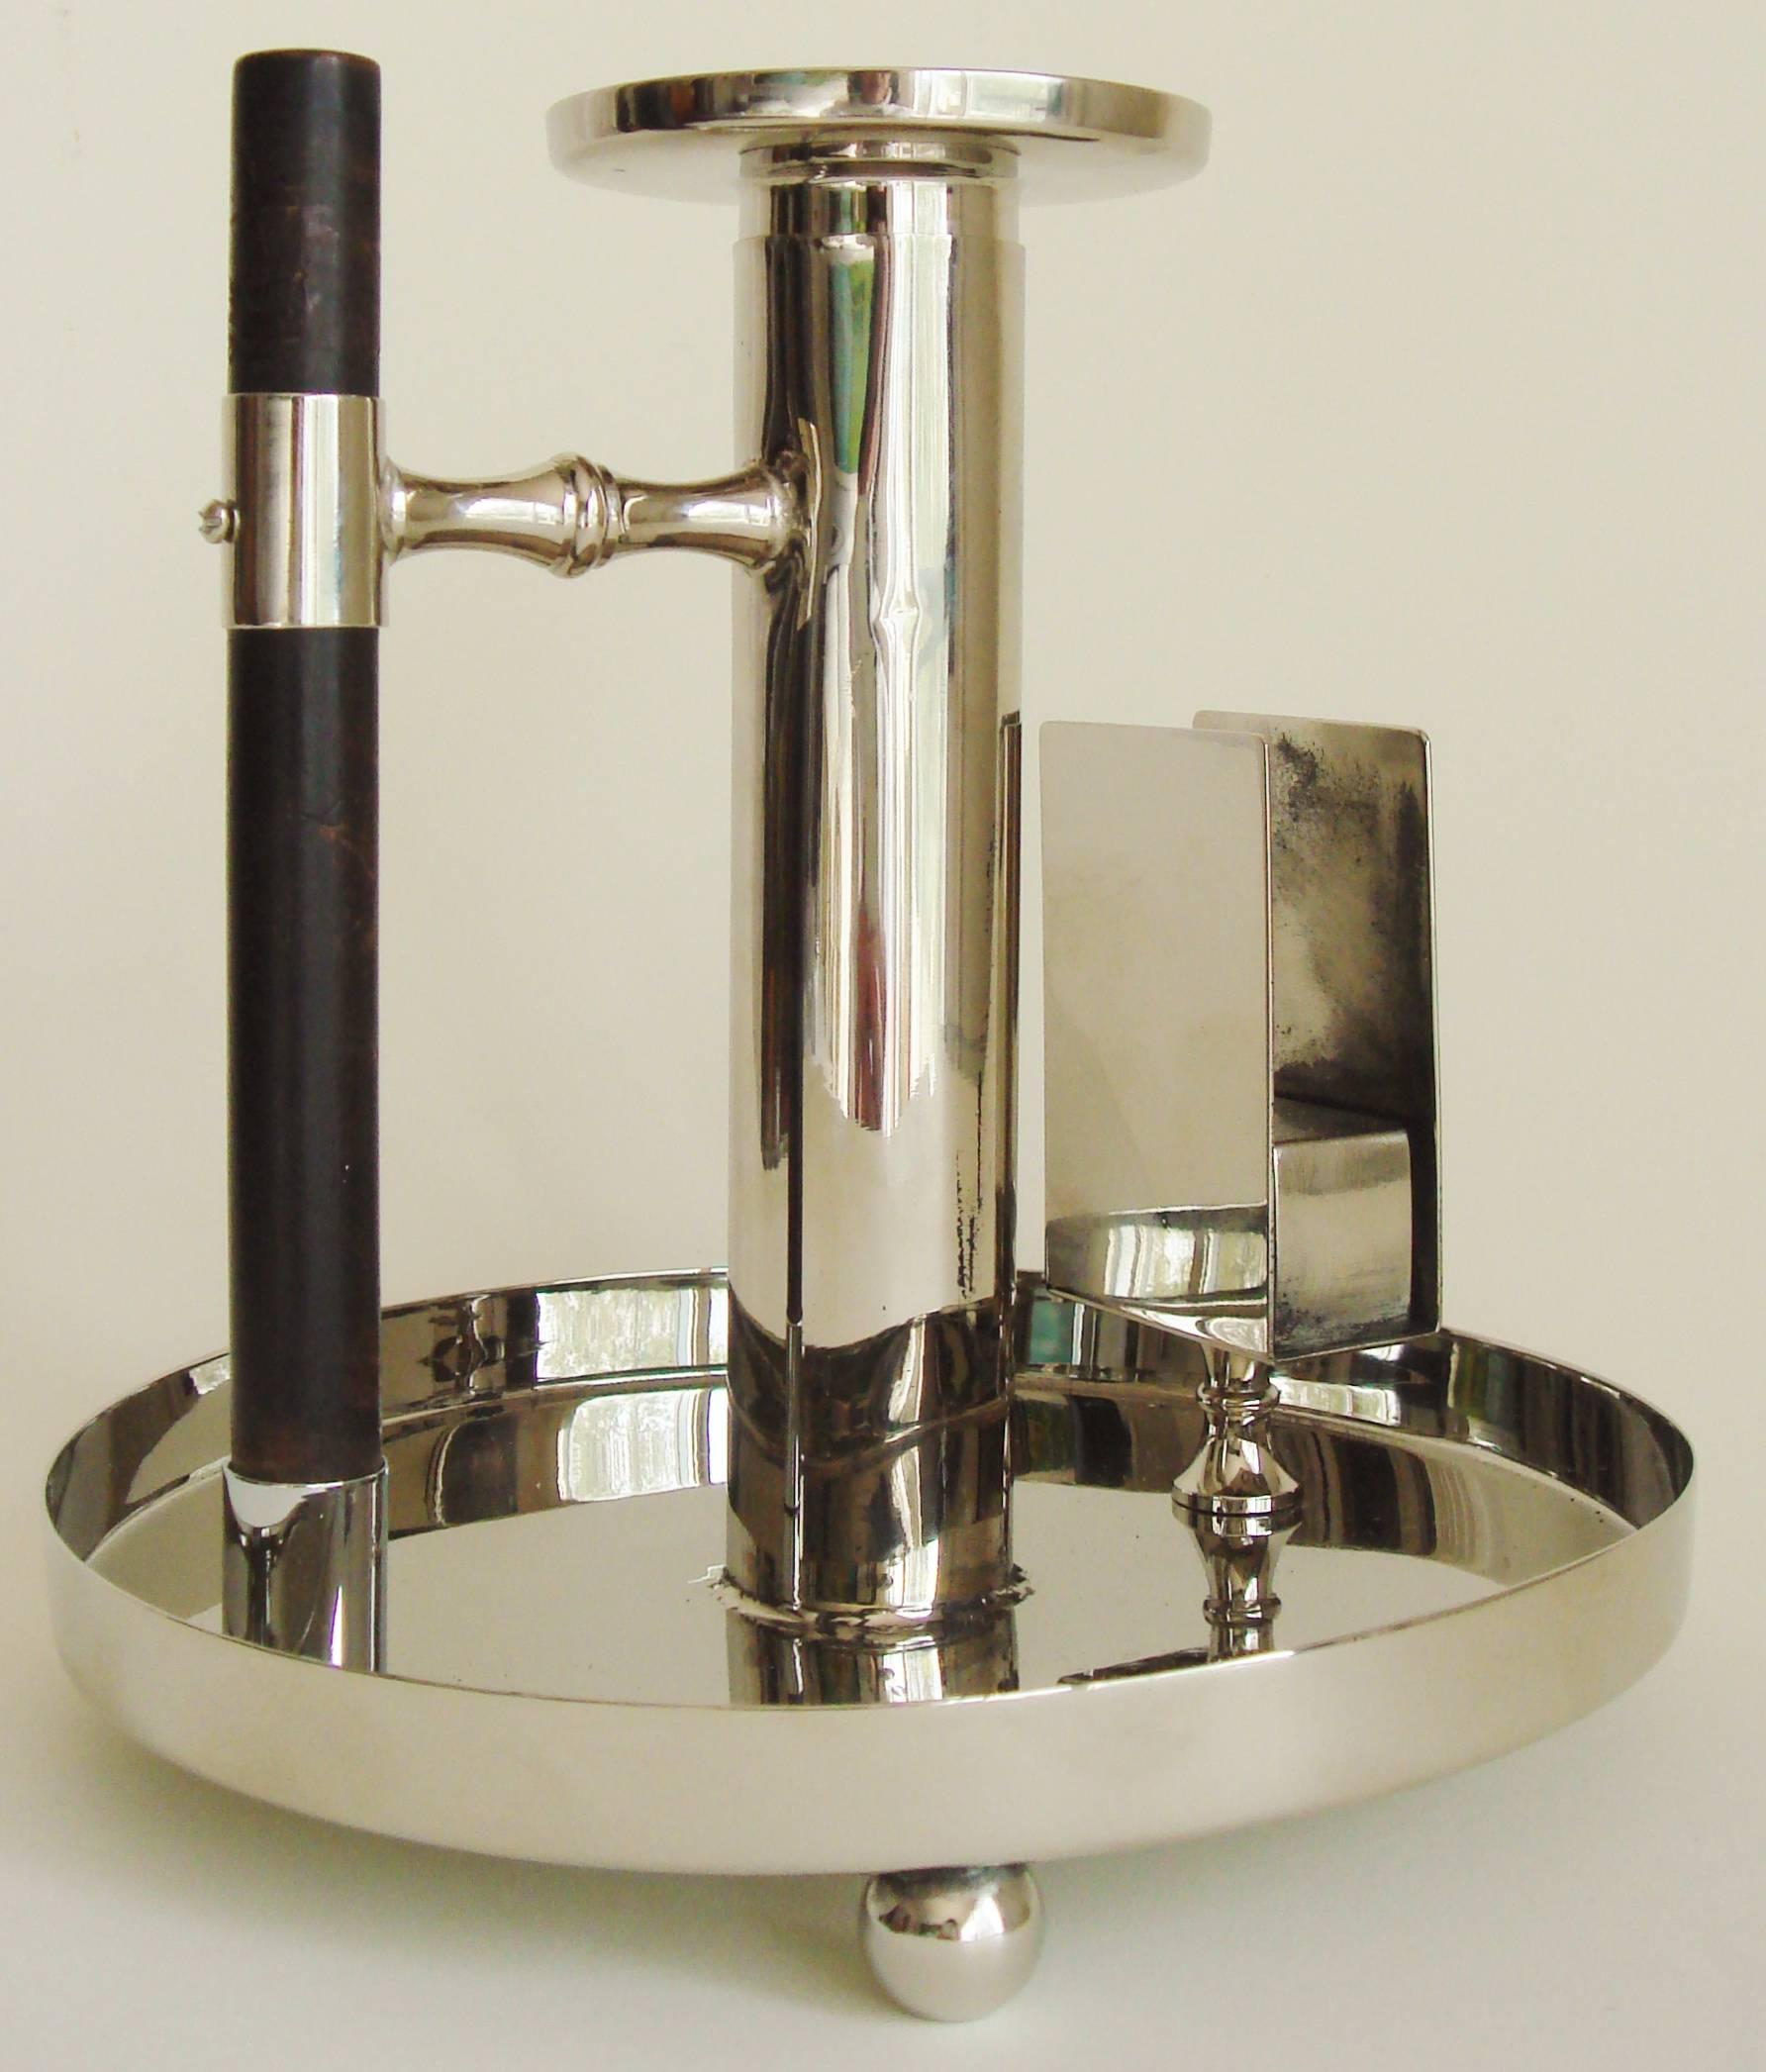 This nickel-plated and ebonized wood German Jugendstil chamber/candlestick was designed by the great Dr. Christopher Dresser and manufactured by the firm of Wurttembergische Metallwarenfabrik/WMF. We have sold an example of this chamberstick before